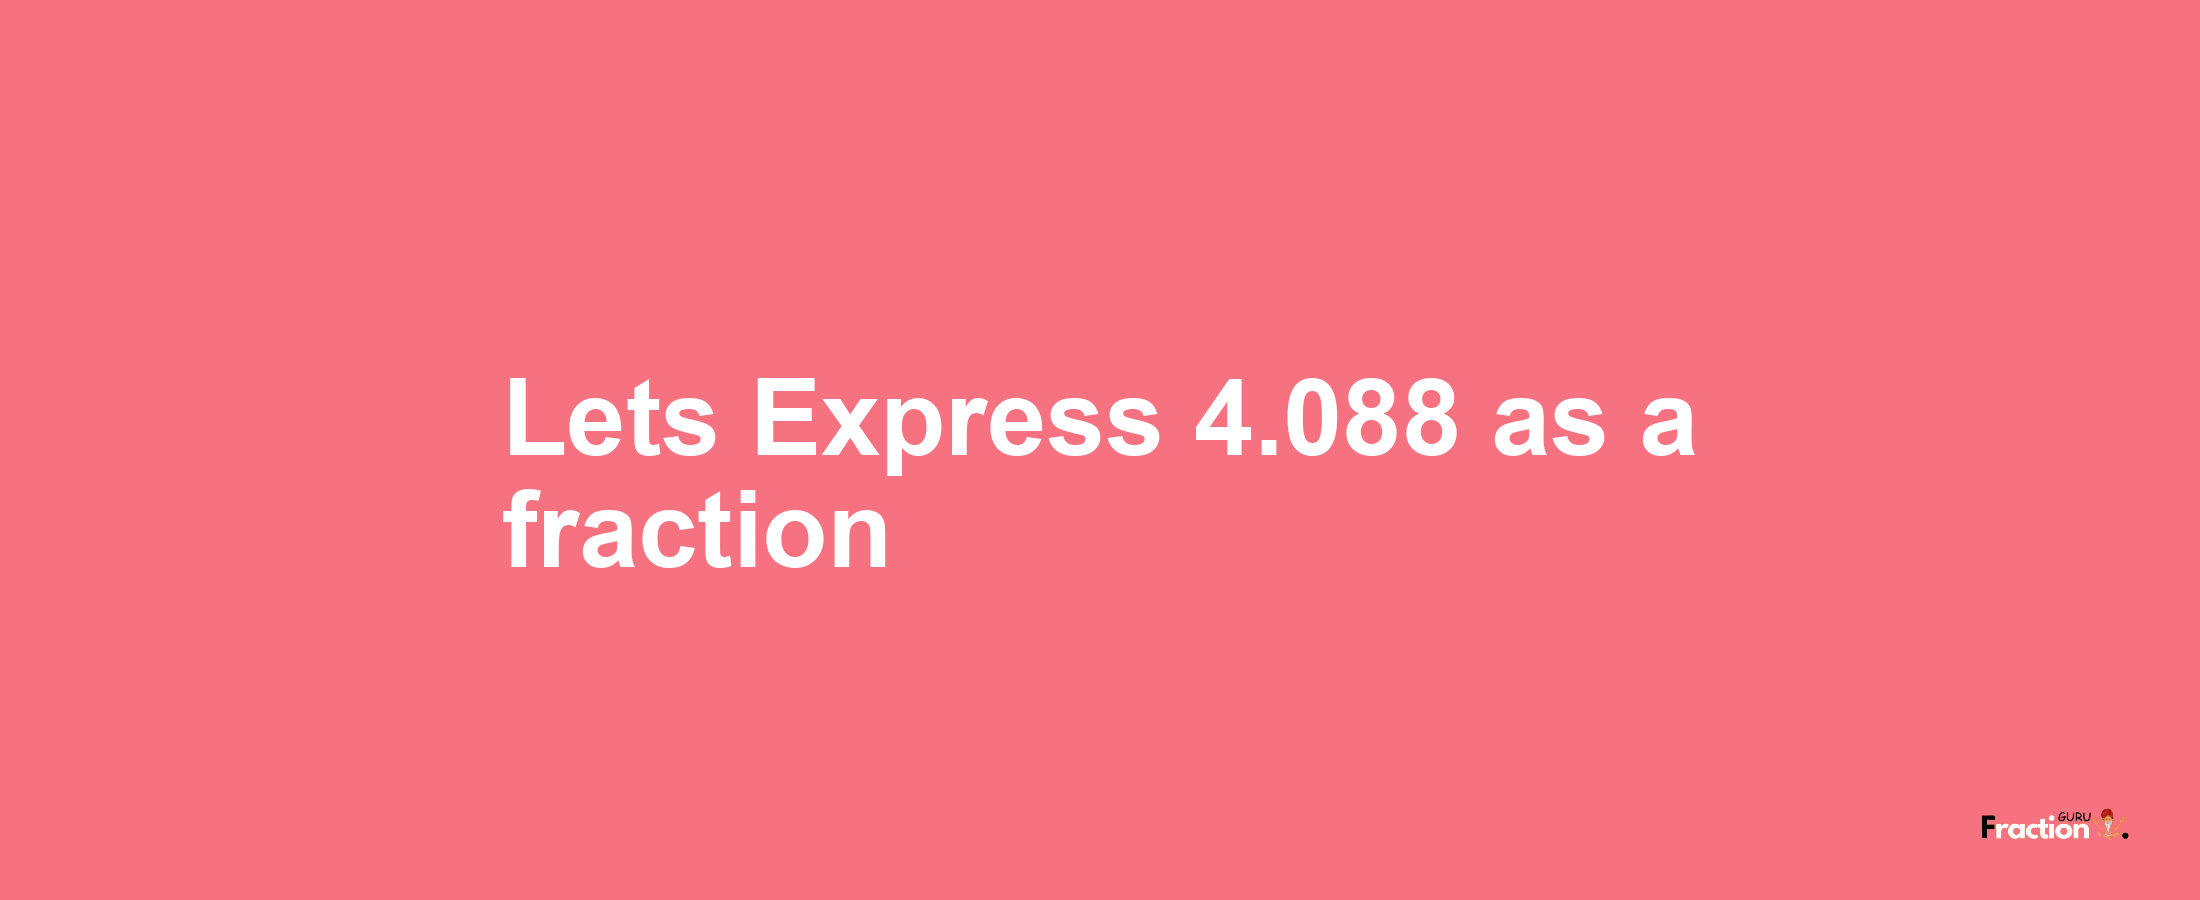 Lets Express 4.088 as afraction